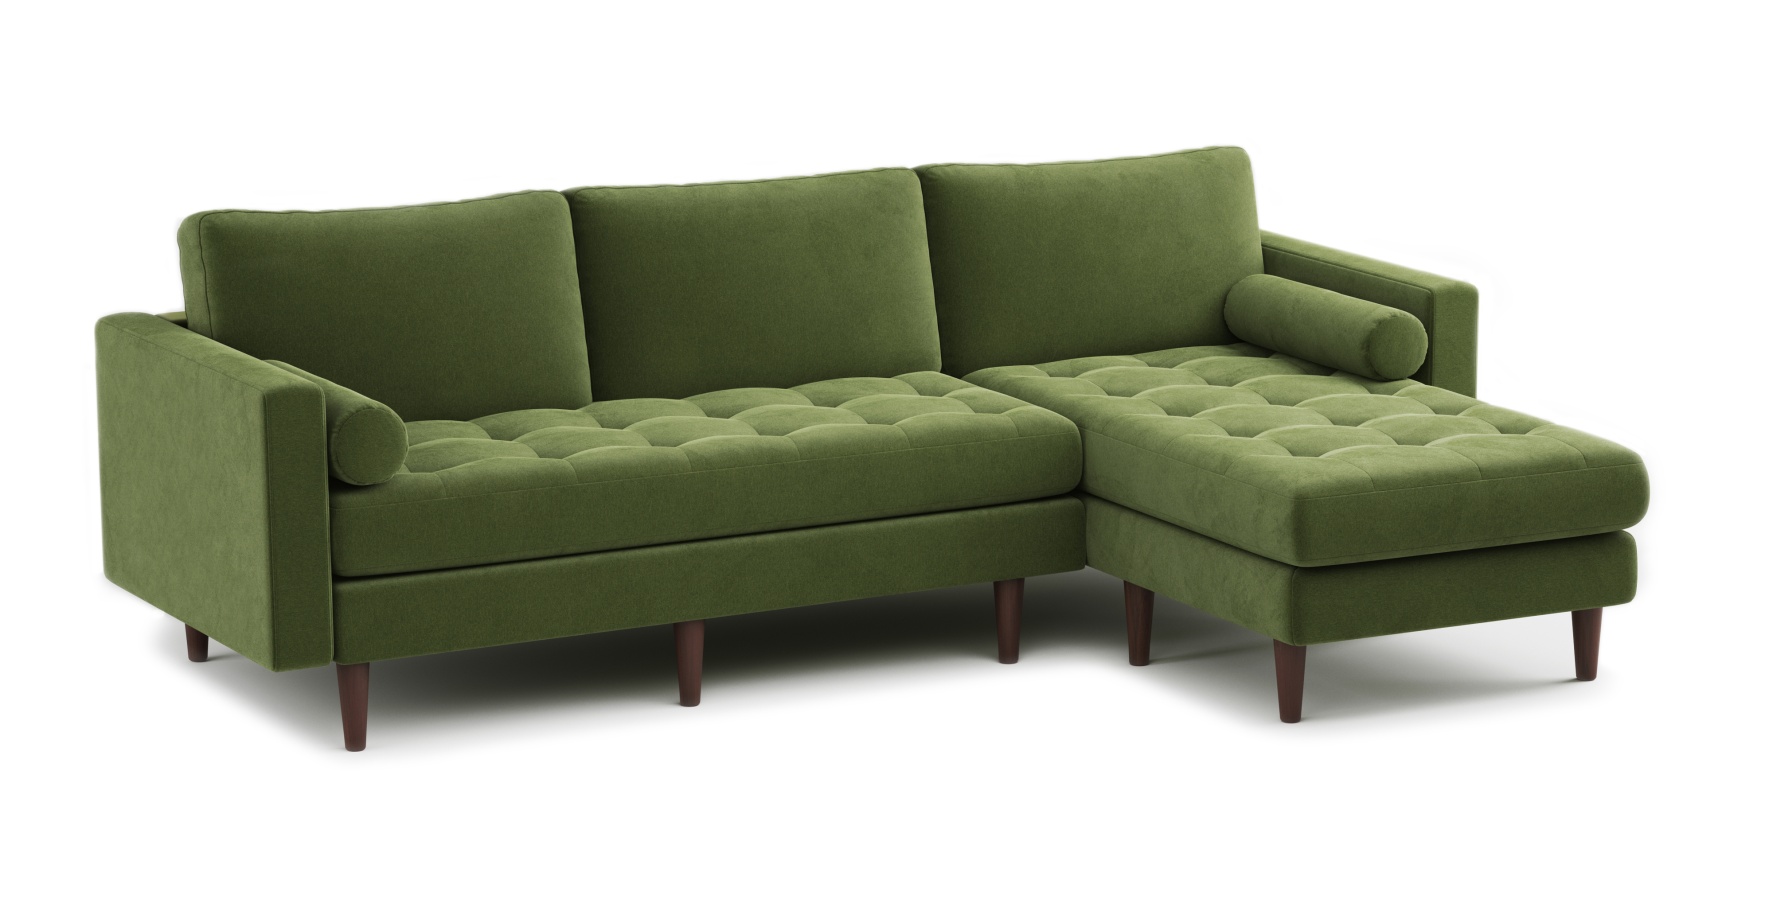 Vintage Moss Sofa Chaise